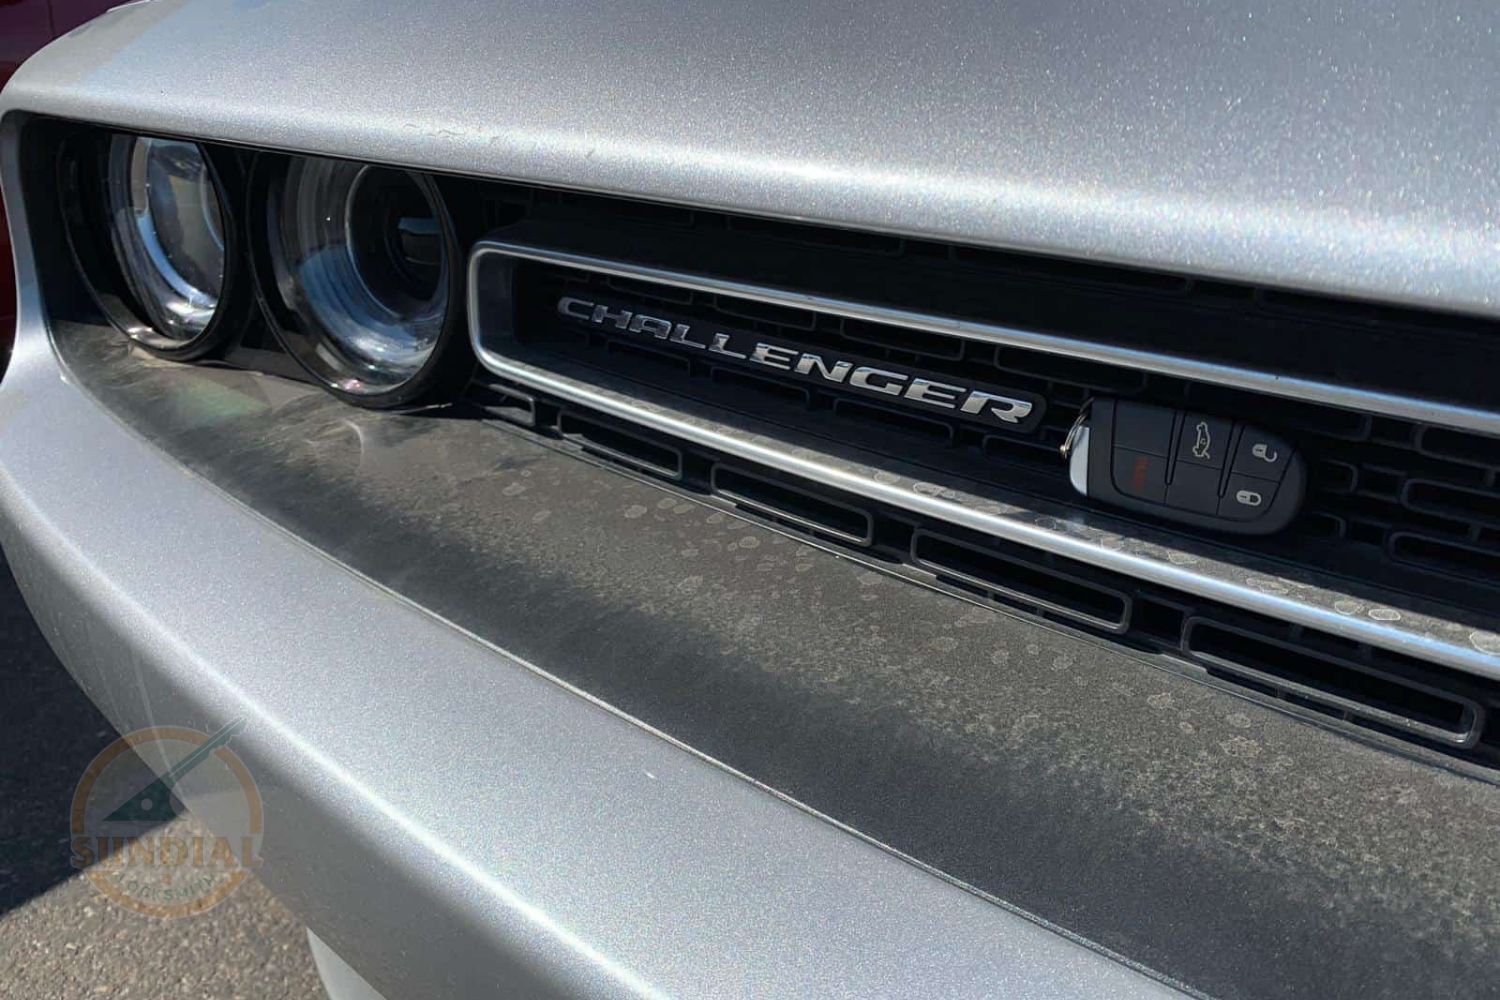 A key fob displayed in front of the grille of a Dodge Challenger with the car's name clearly visible.